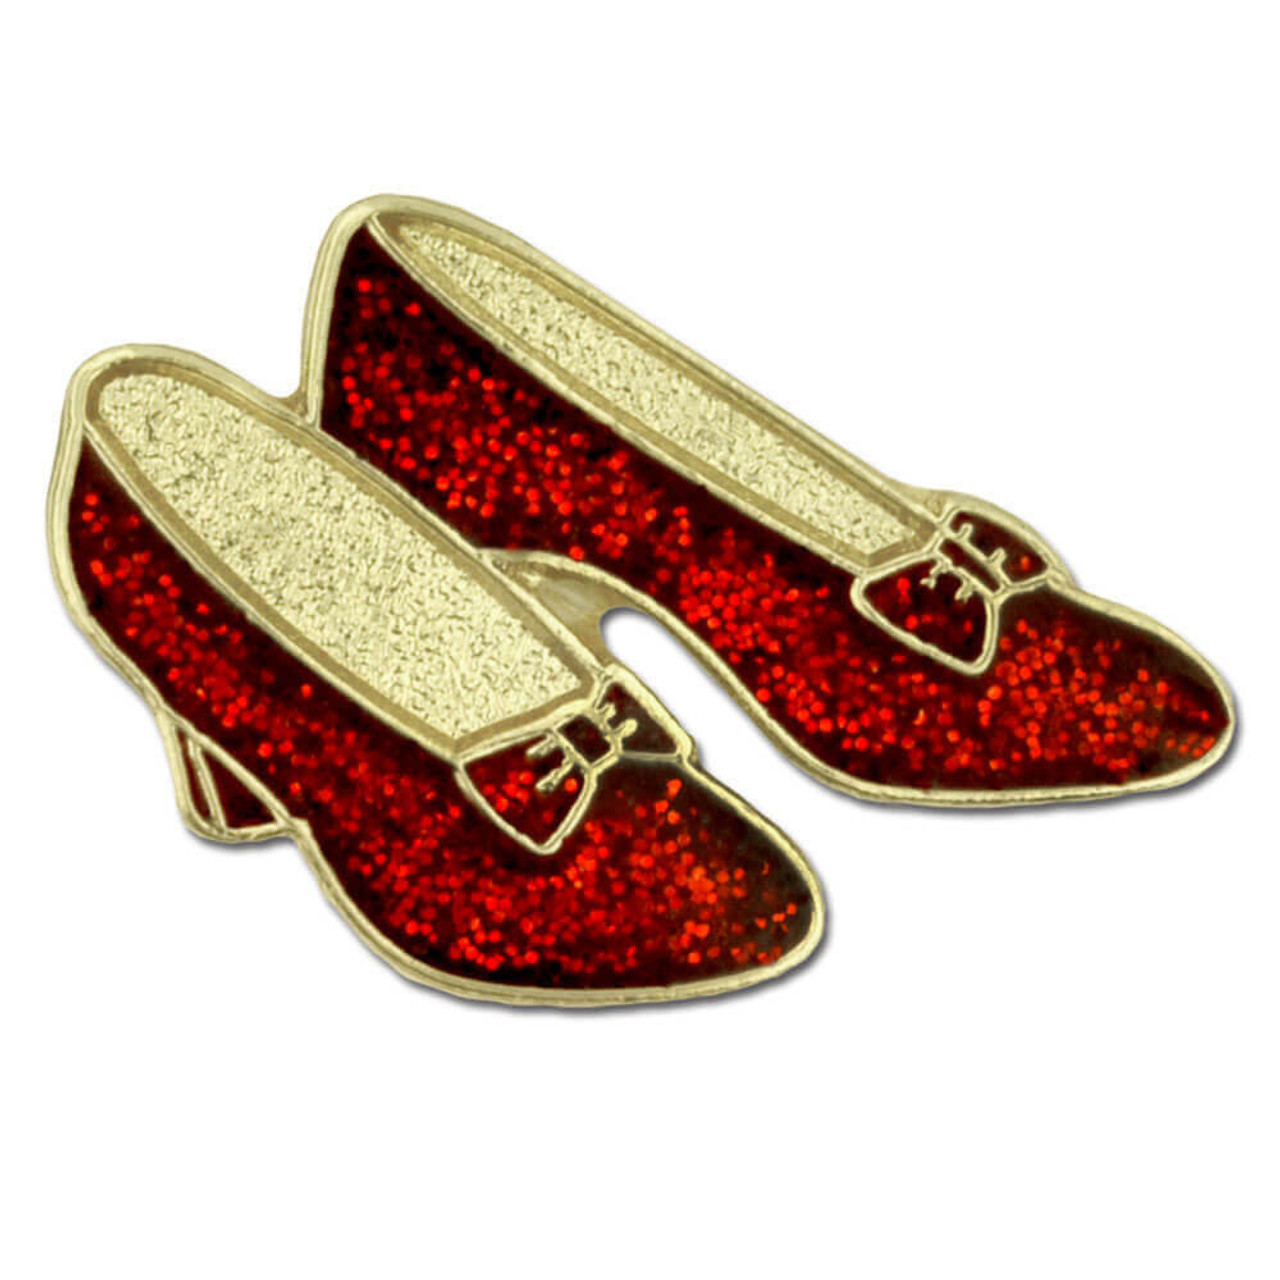 Pin on Women's Shoes